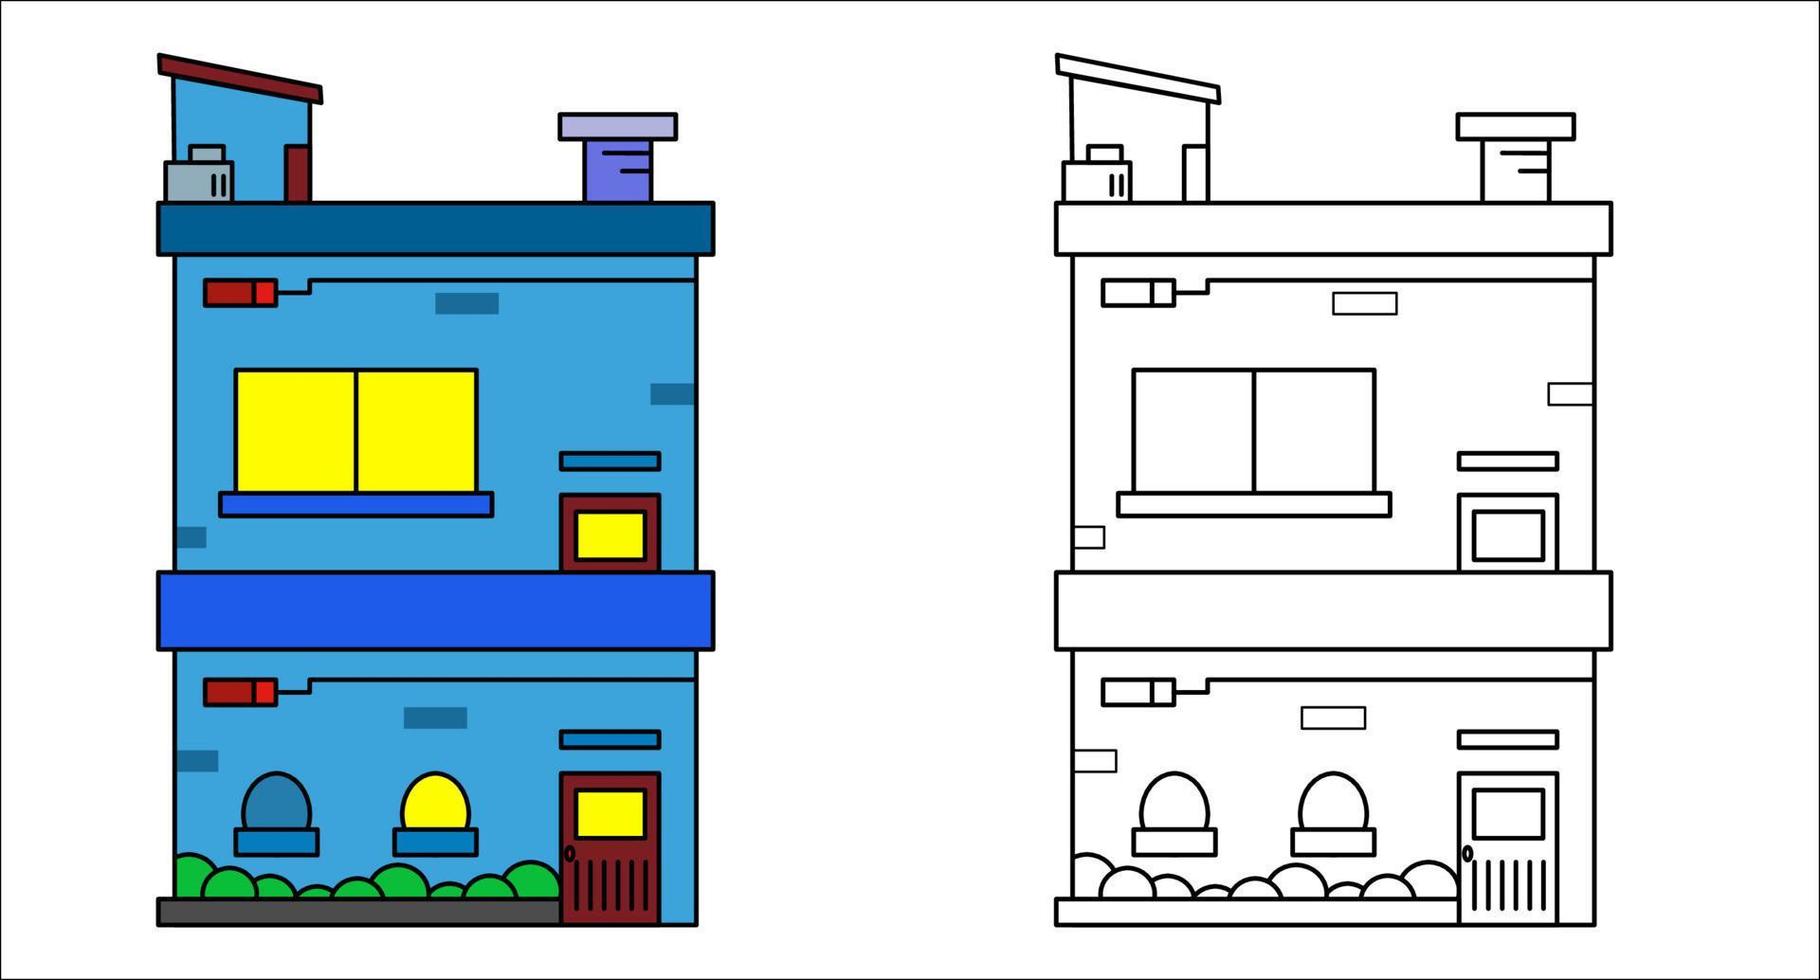 Coloring book. Coloring book fantastic house for kids activity colouring pages. Vector illustration